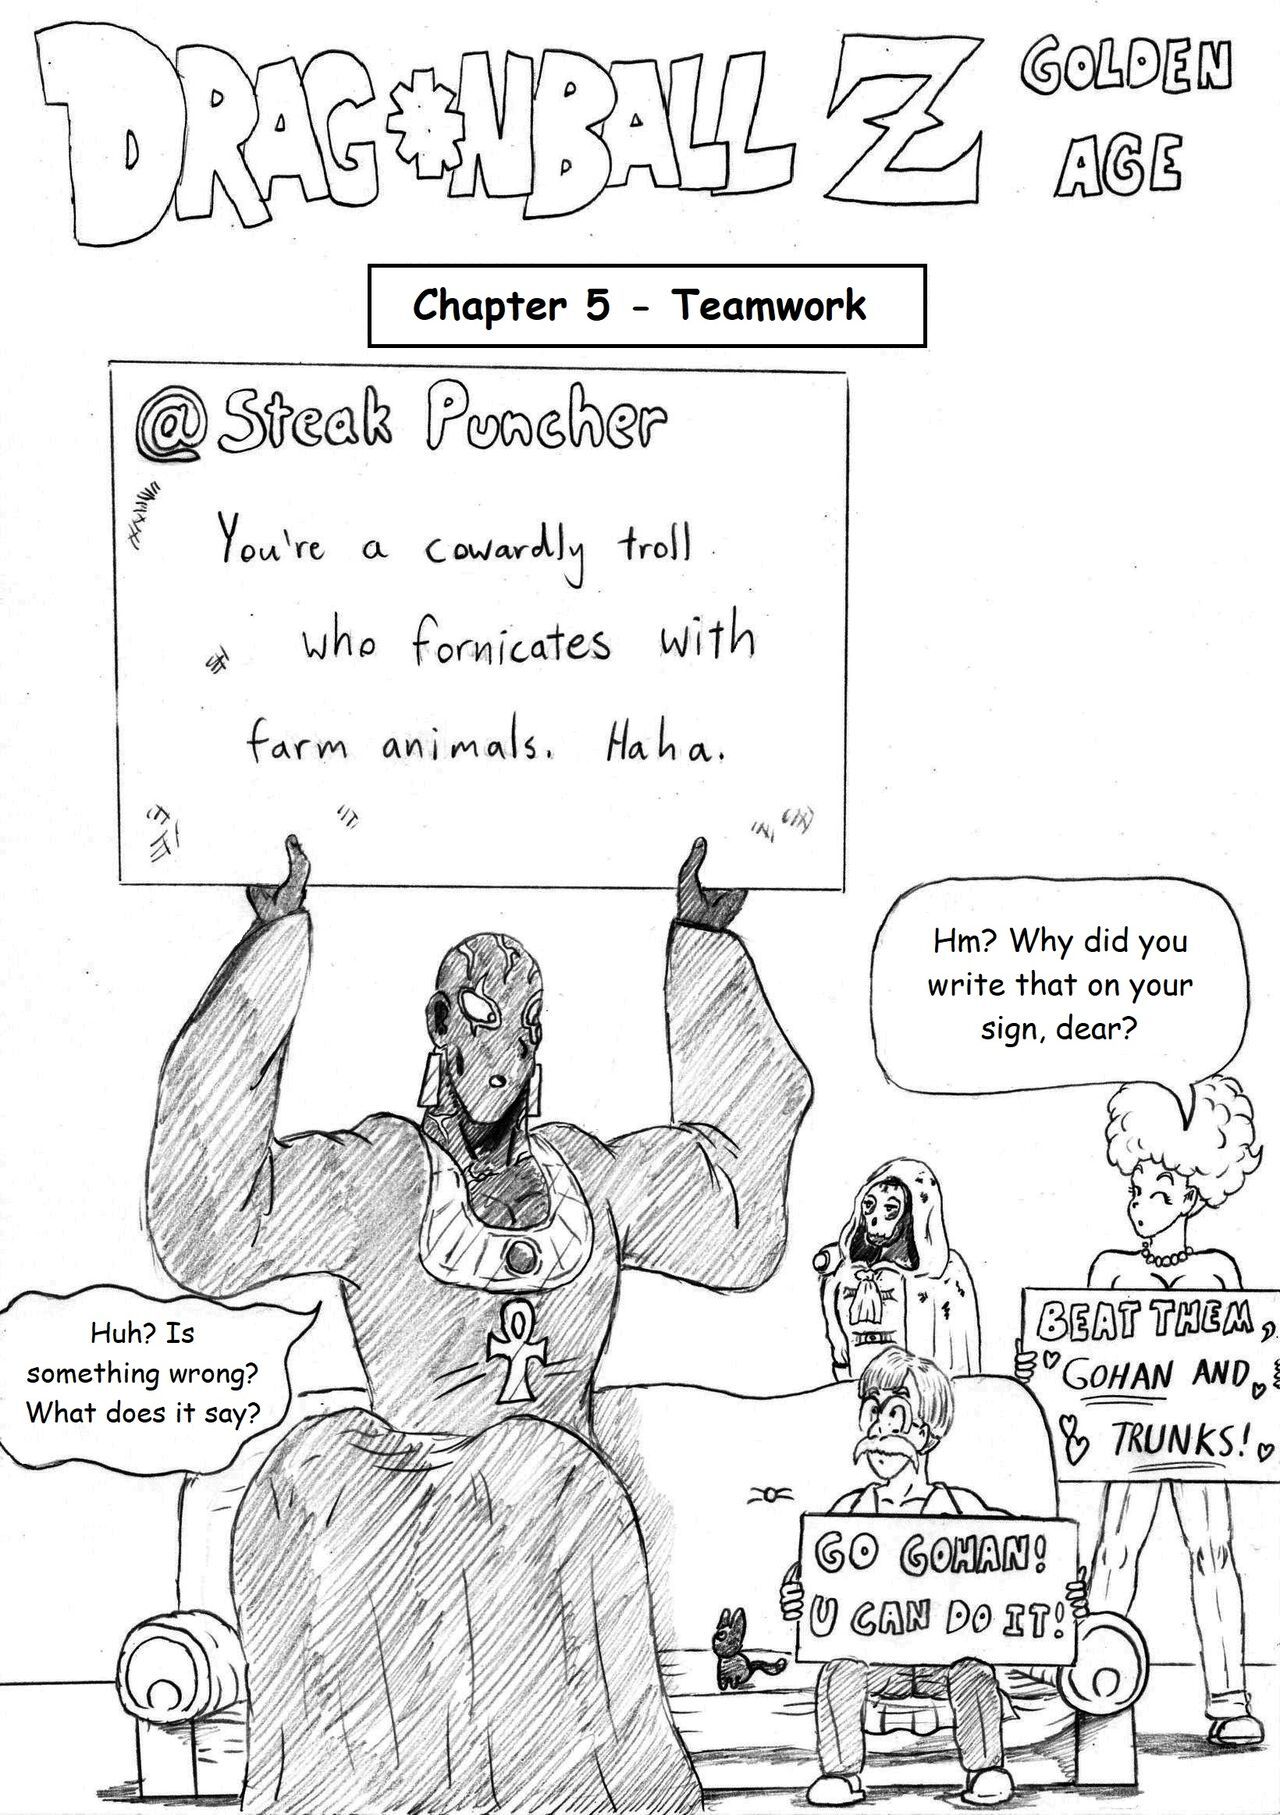 [TheWriteFiction] Dragonball Z Golden Age - Chapter 5 - Teamwork (Ongoing) 1